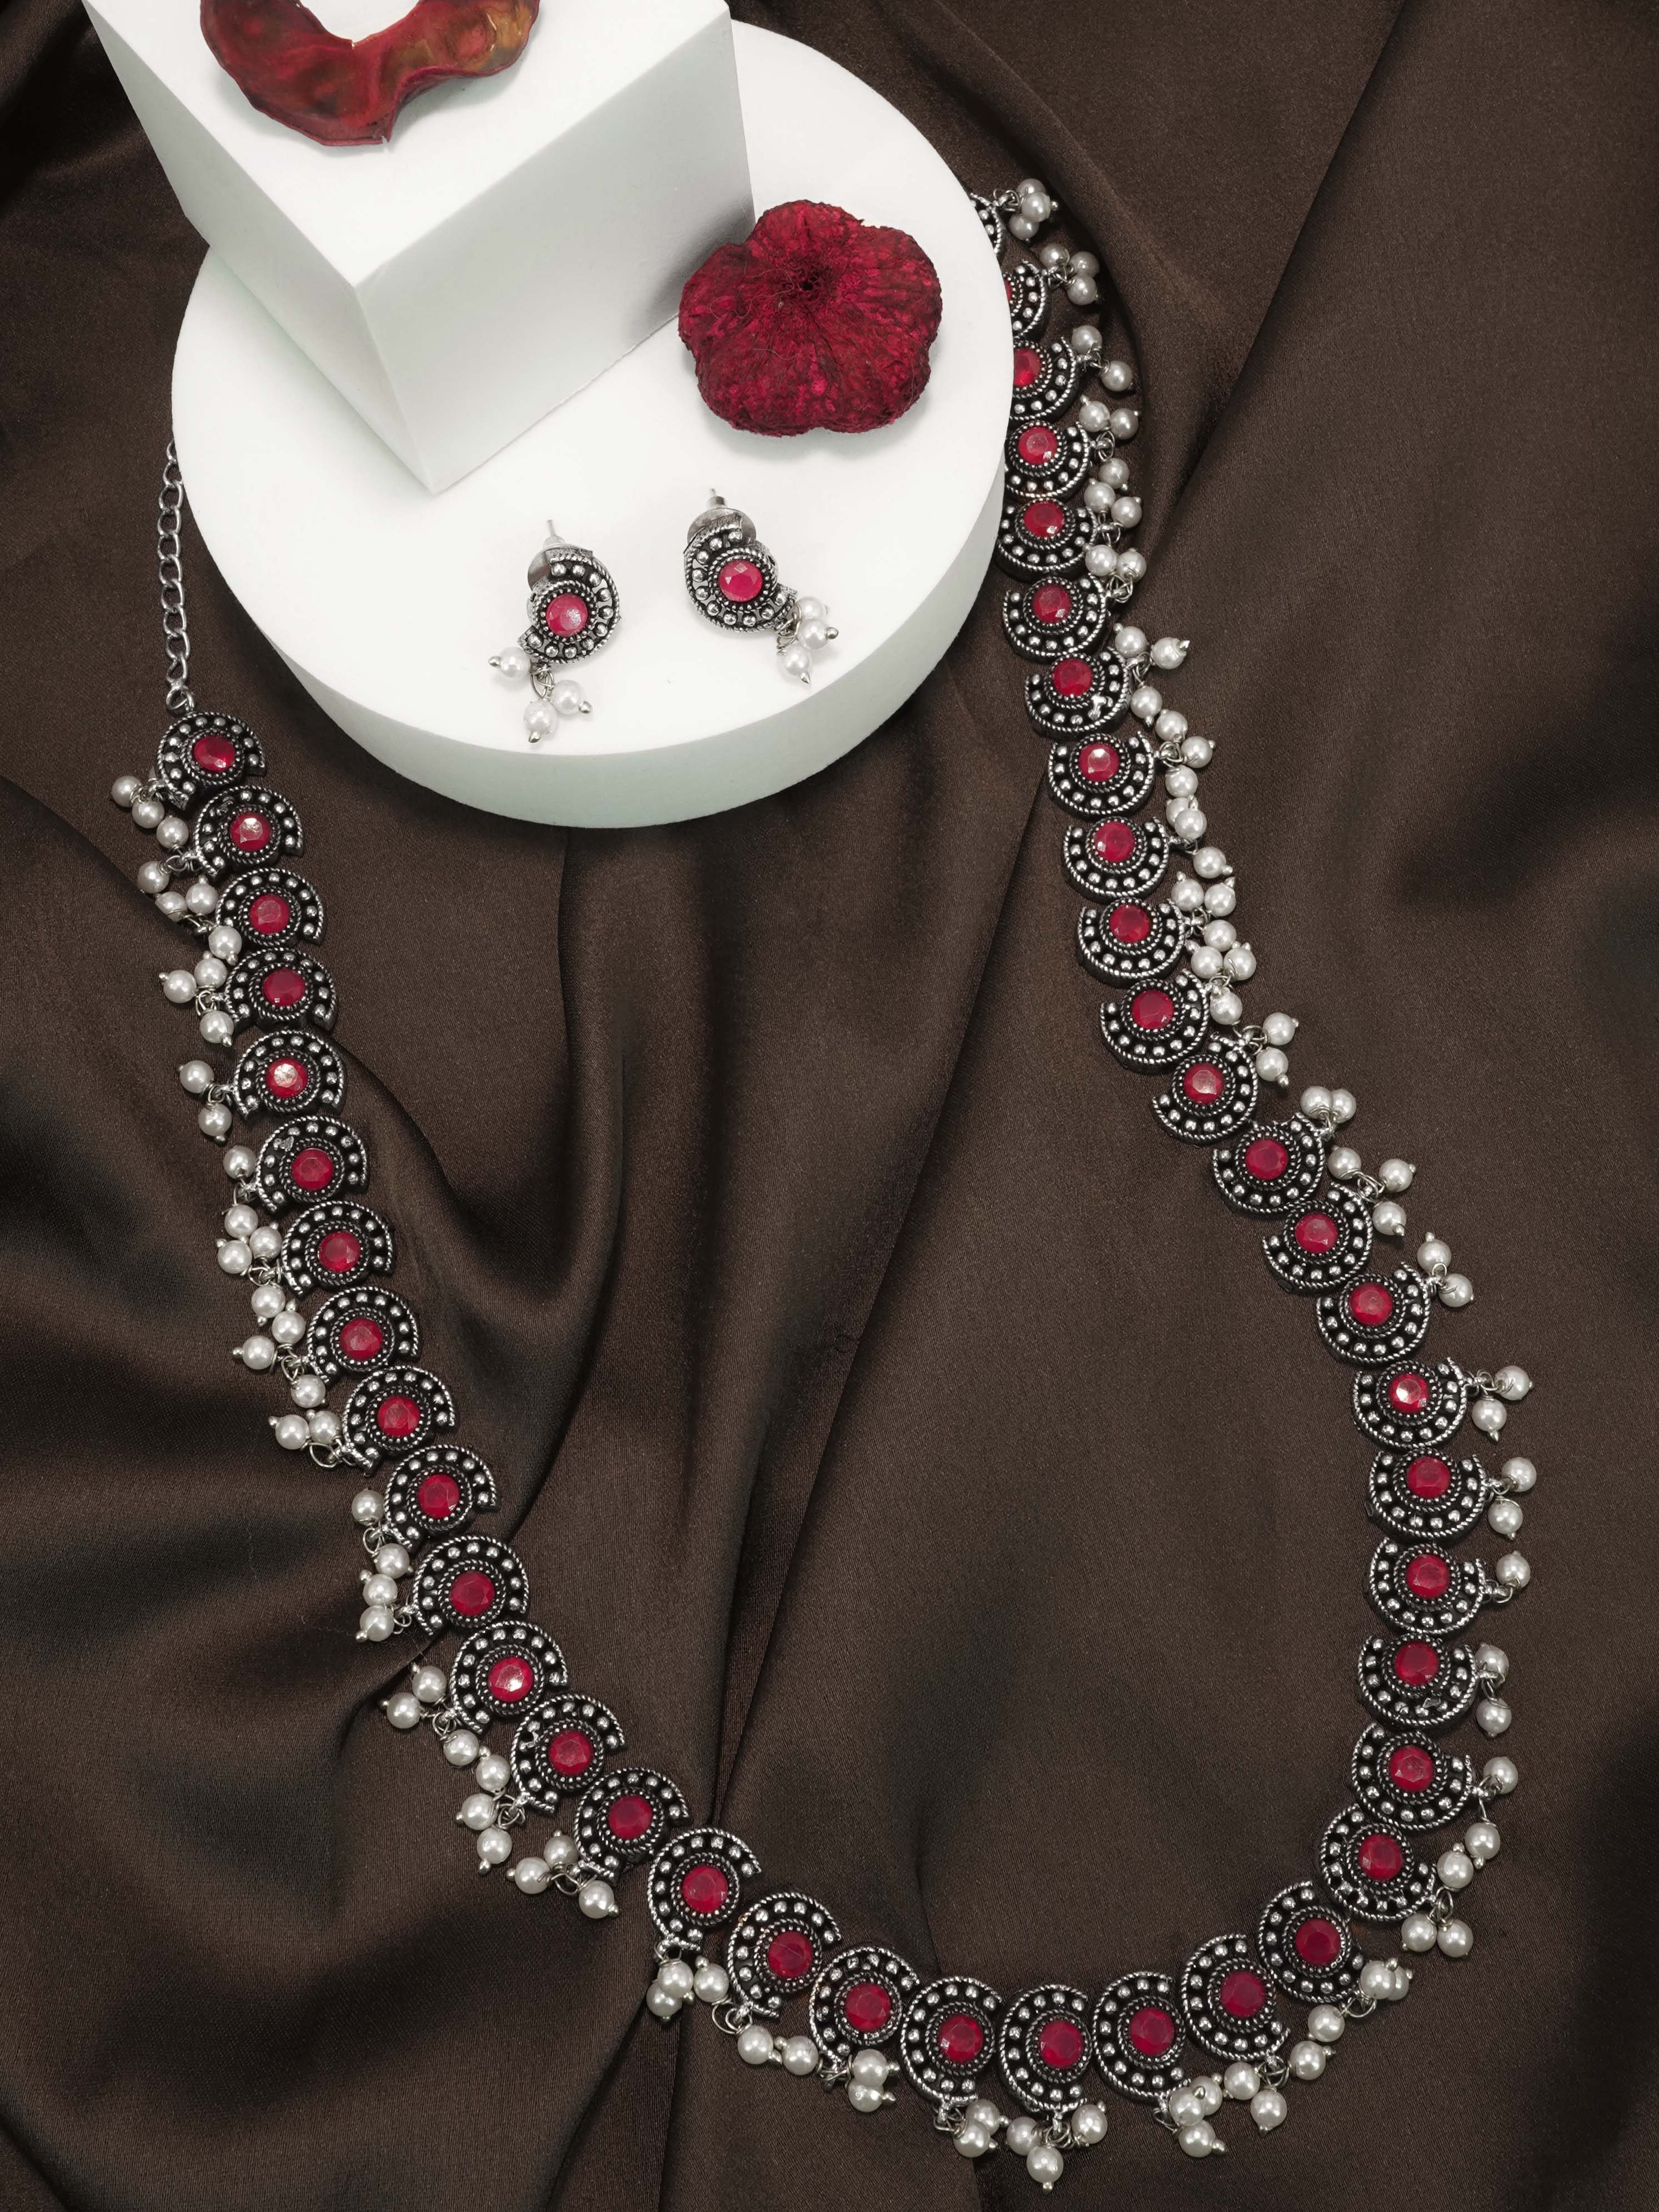 Premium Classy Oxidised Necklace Set with pearls and with different colour stones Options 11934N